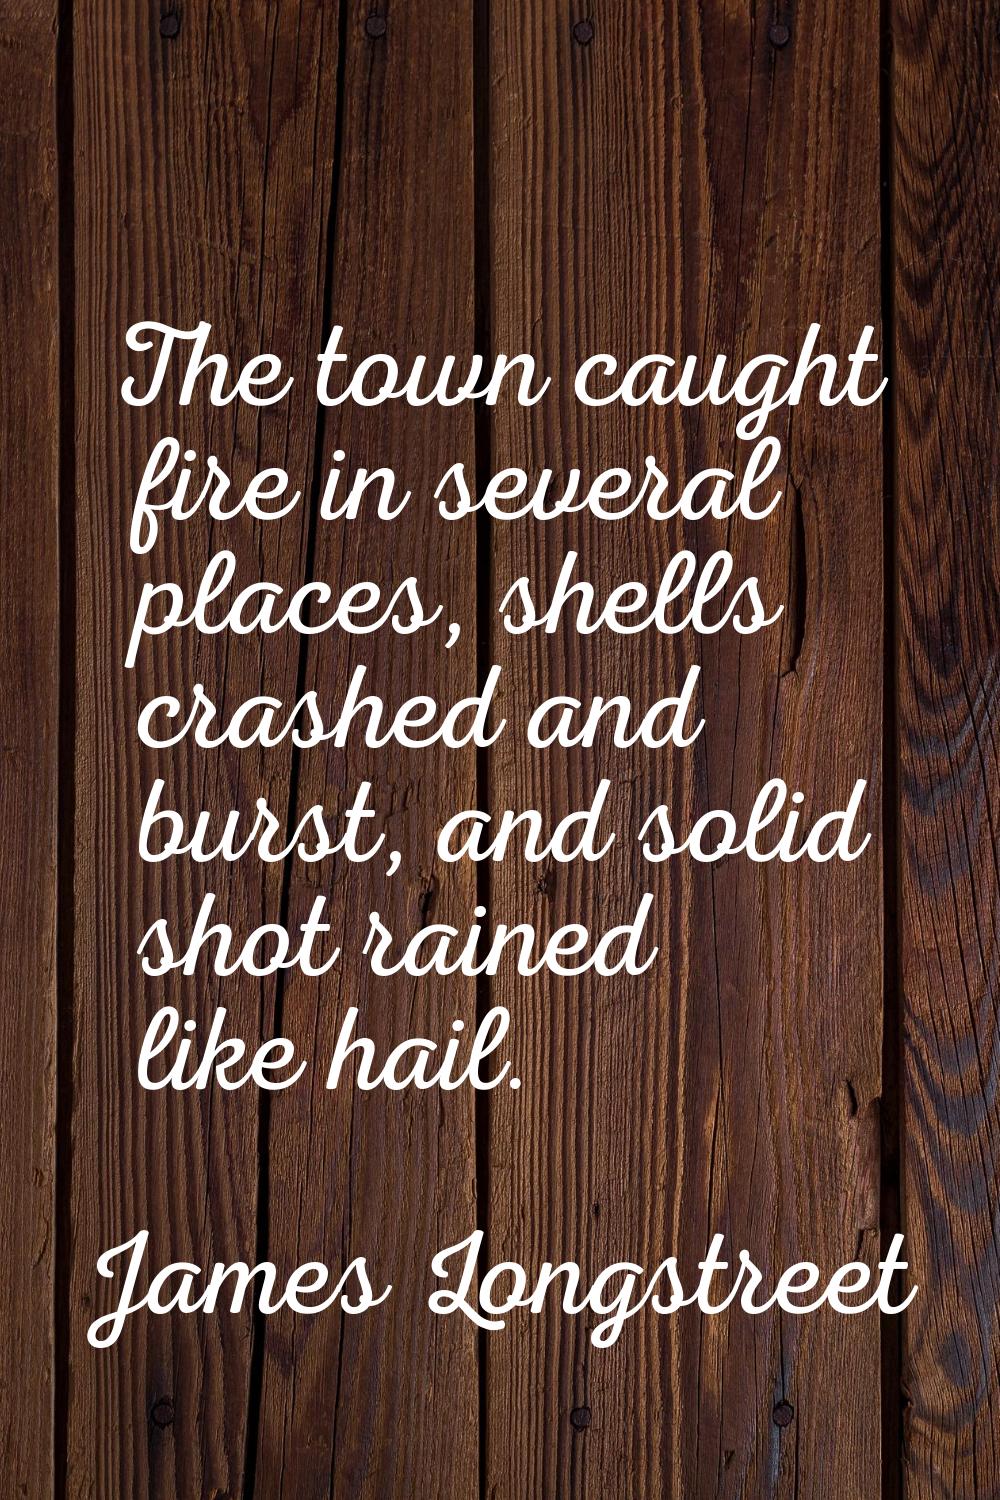 The town caught fire in several places, shells crashed and burst, and solid shot rained like hail.